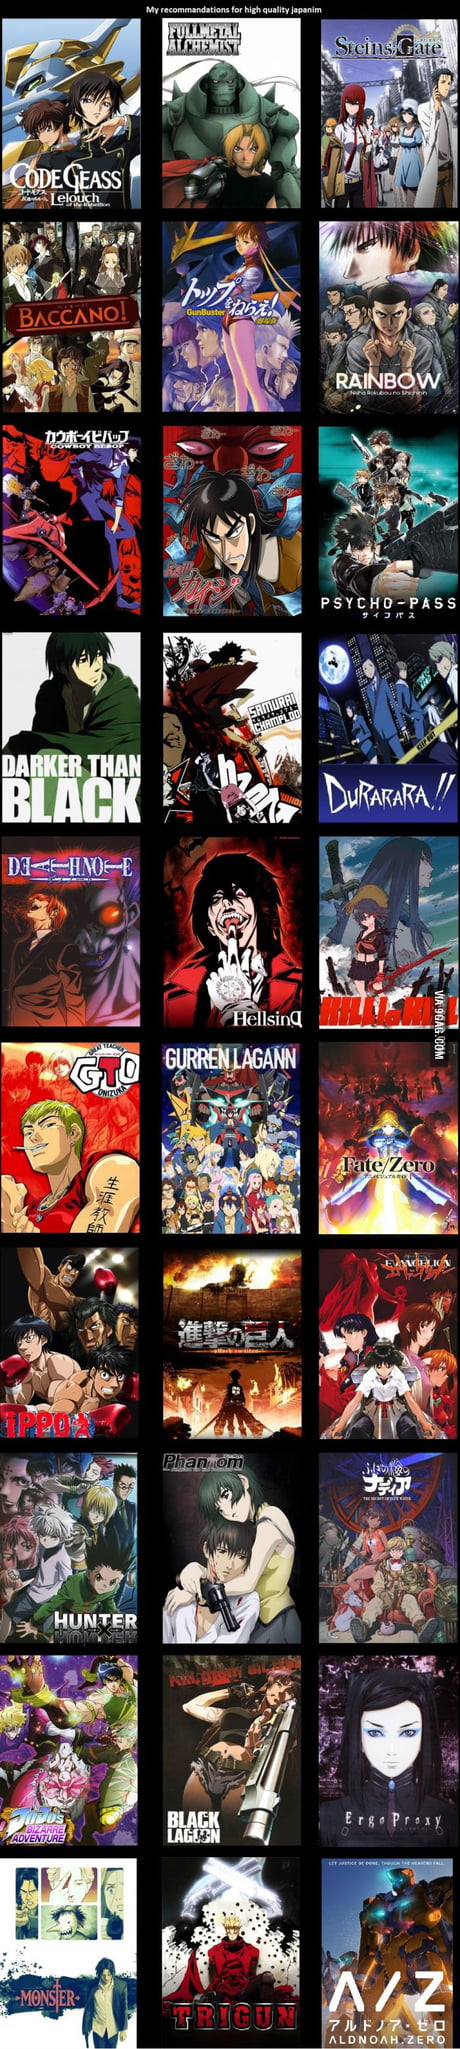 Here is a list of good anime recommendations :) Enjoy! - 9GAG